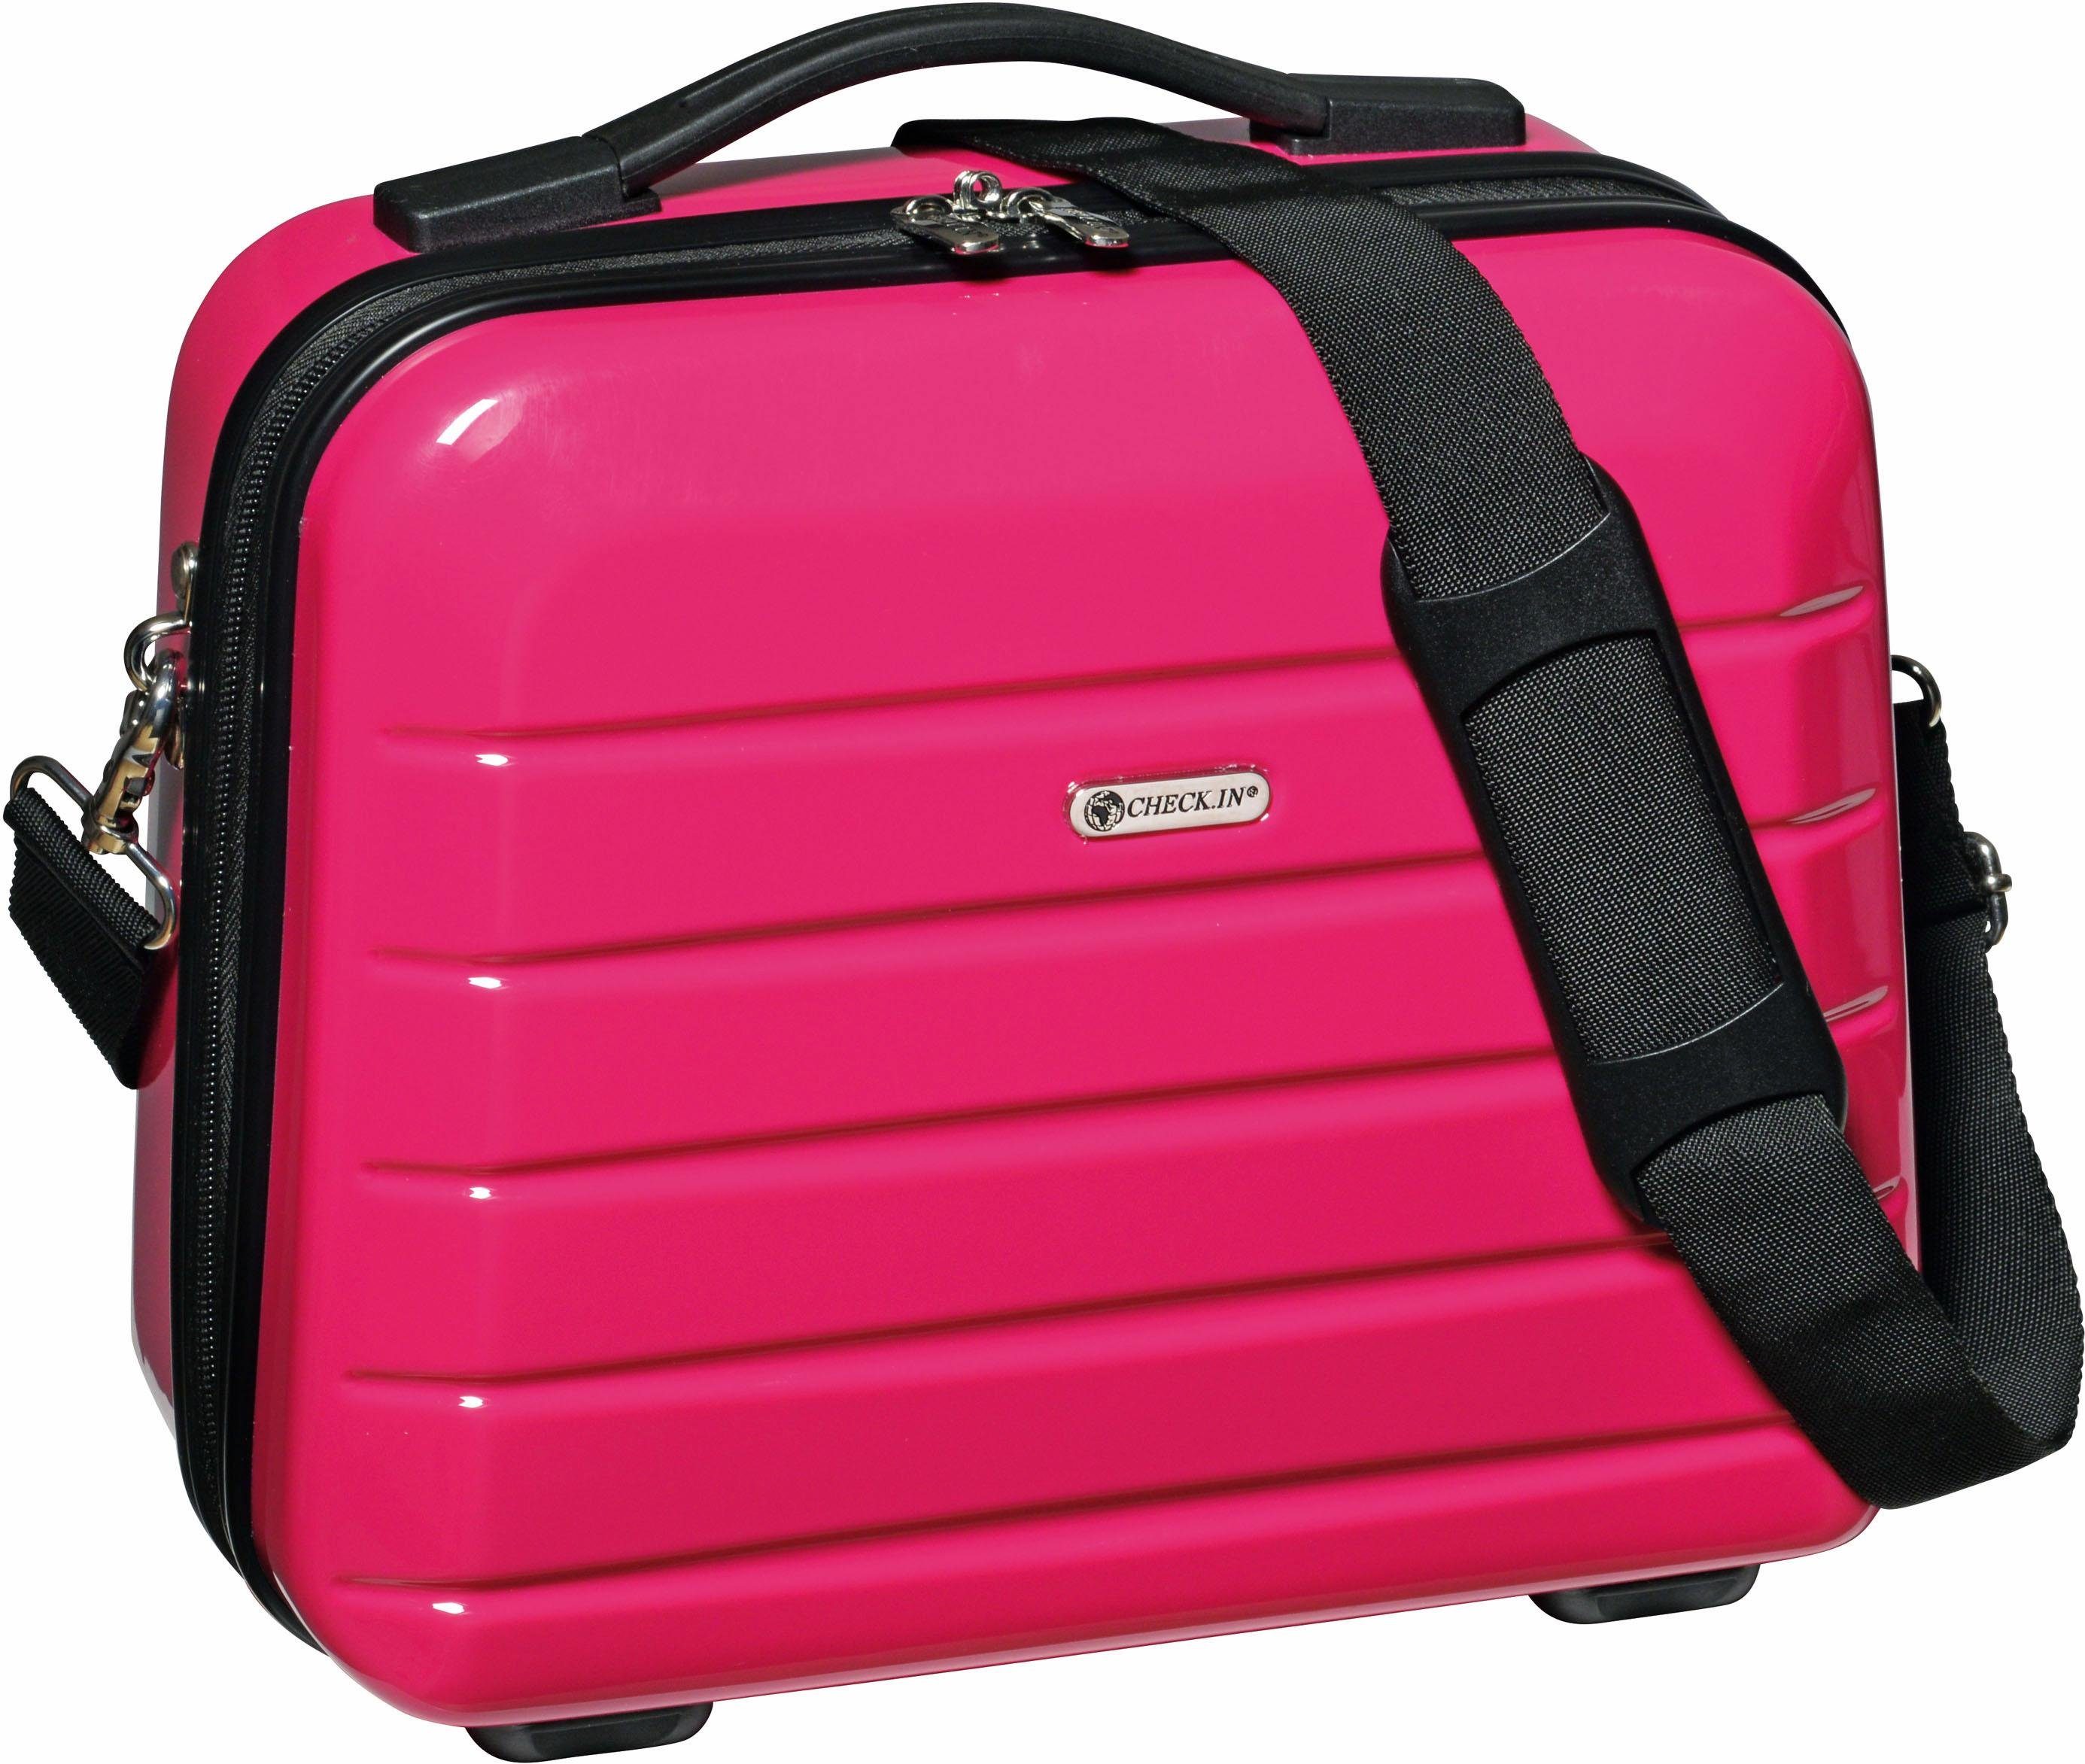 CHECK.IN® Beautycase London pink 2.0